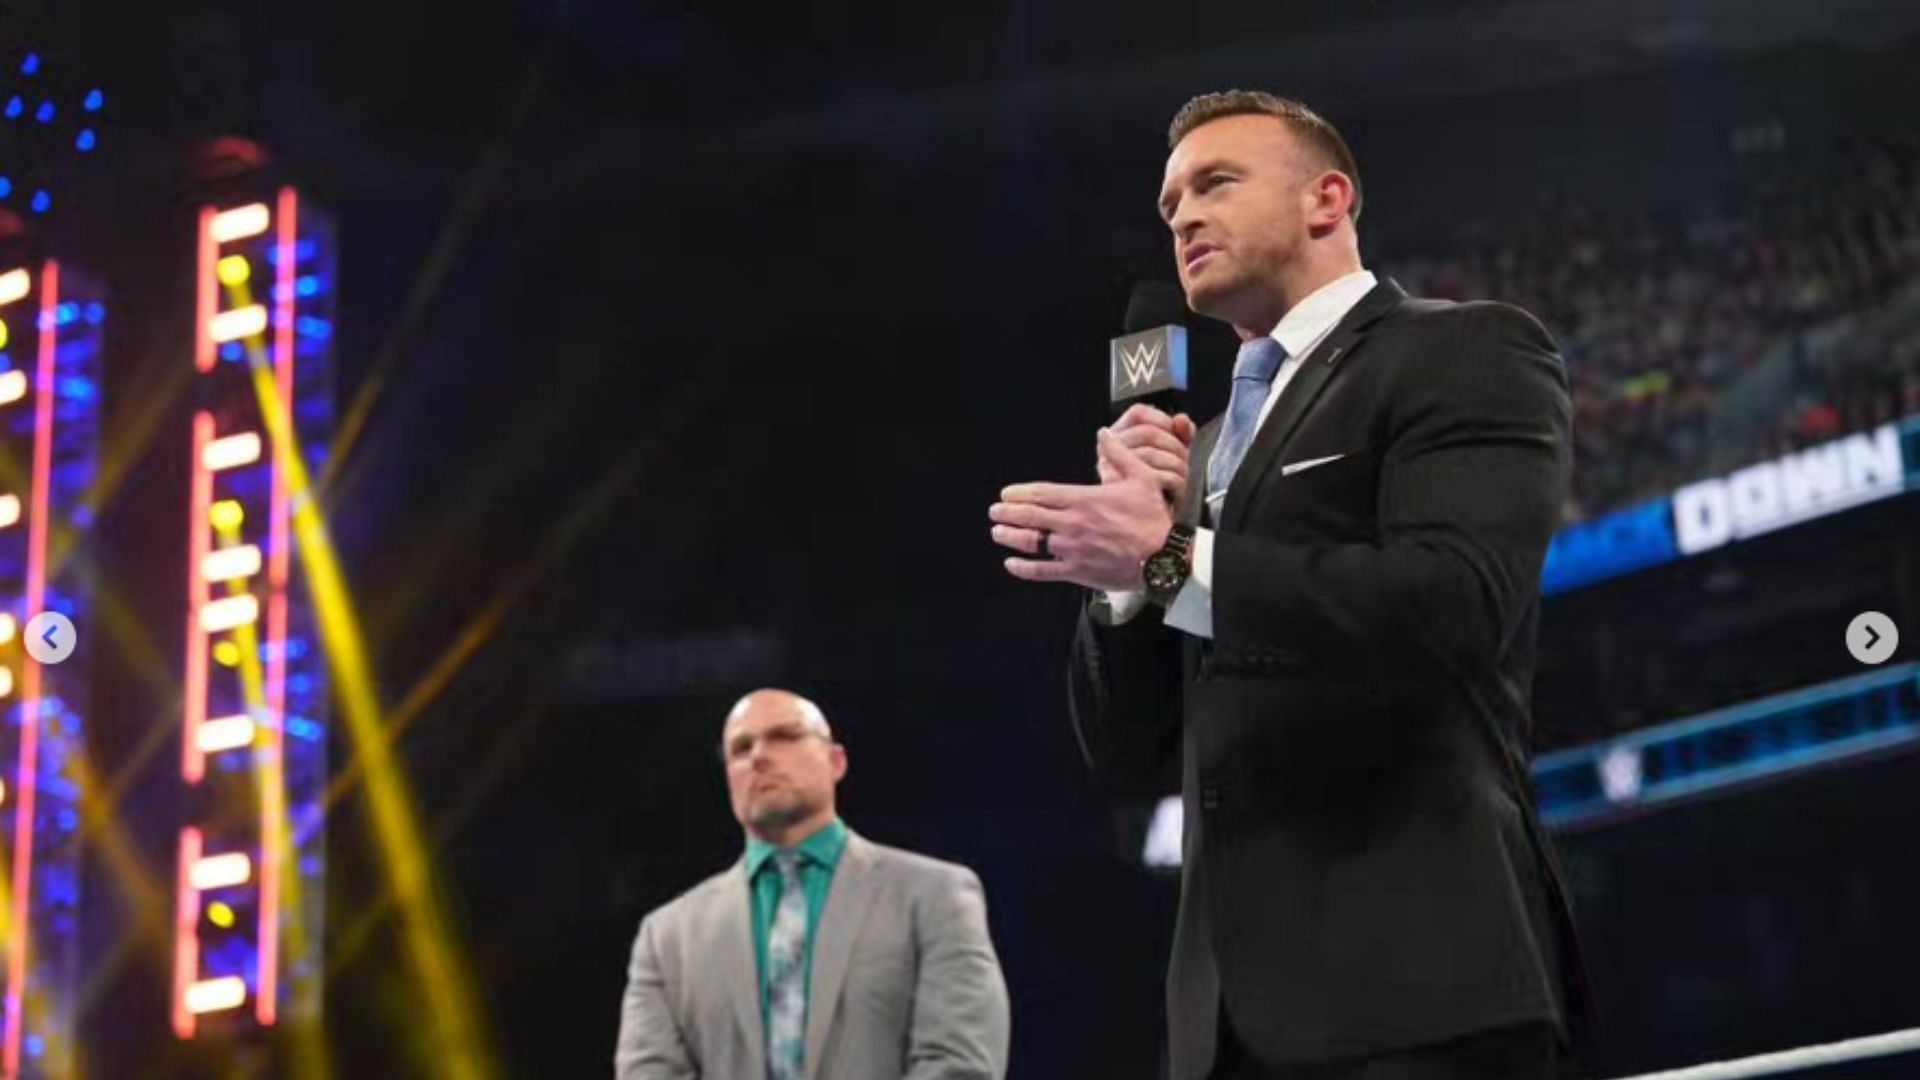 Nick Aldis recently spoke about his top WWE Superstar picks